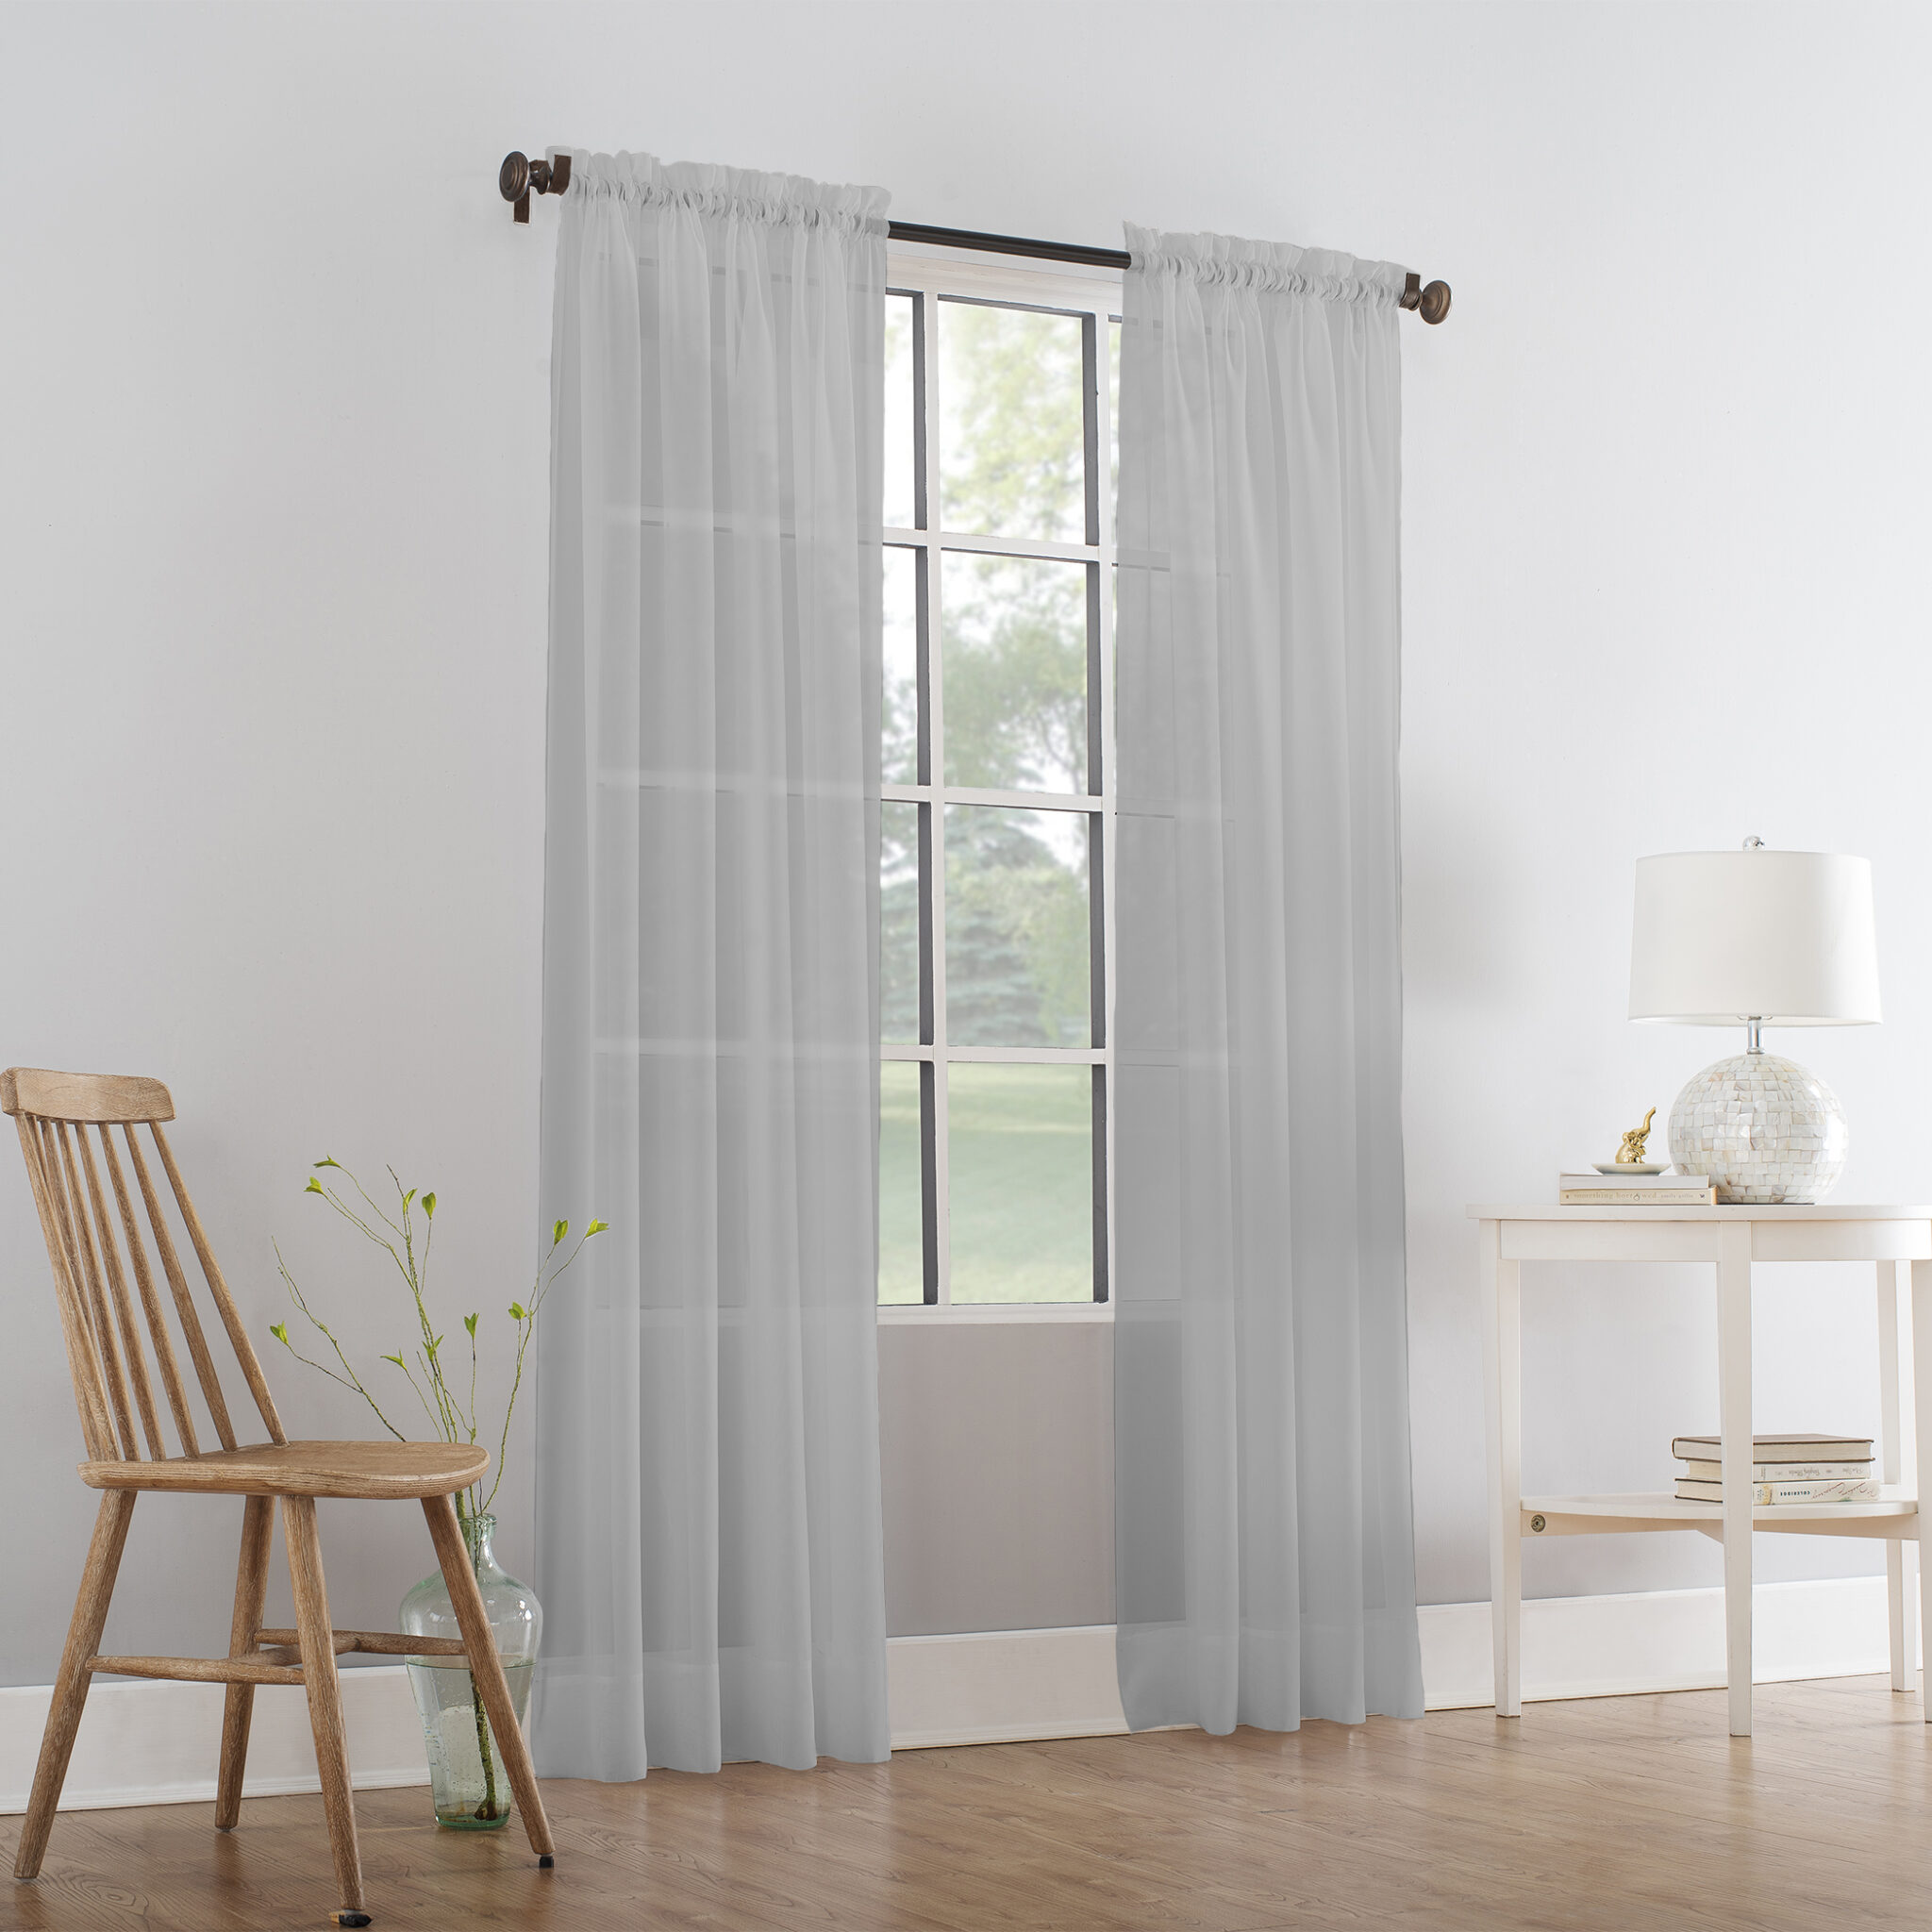 NetCurtains.co.uk | Made to Measure Net Curtains